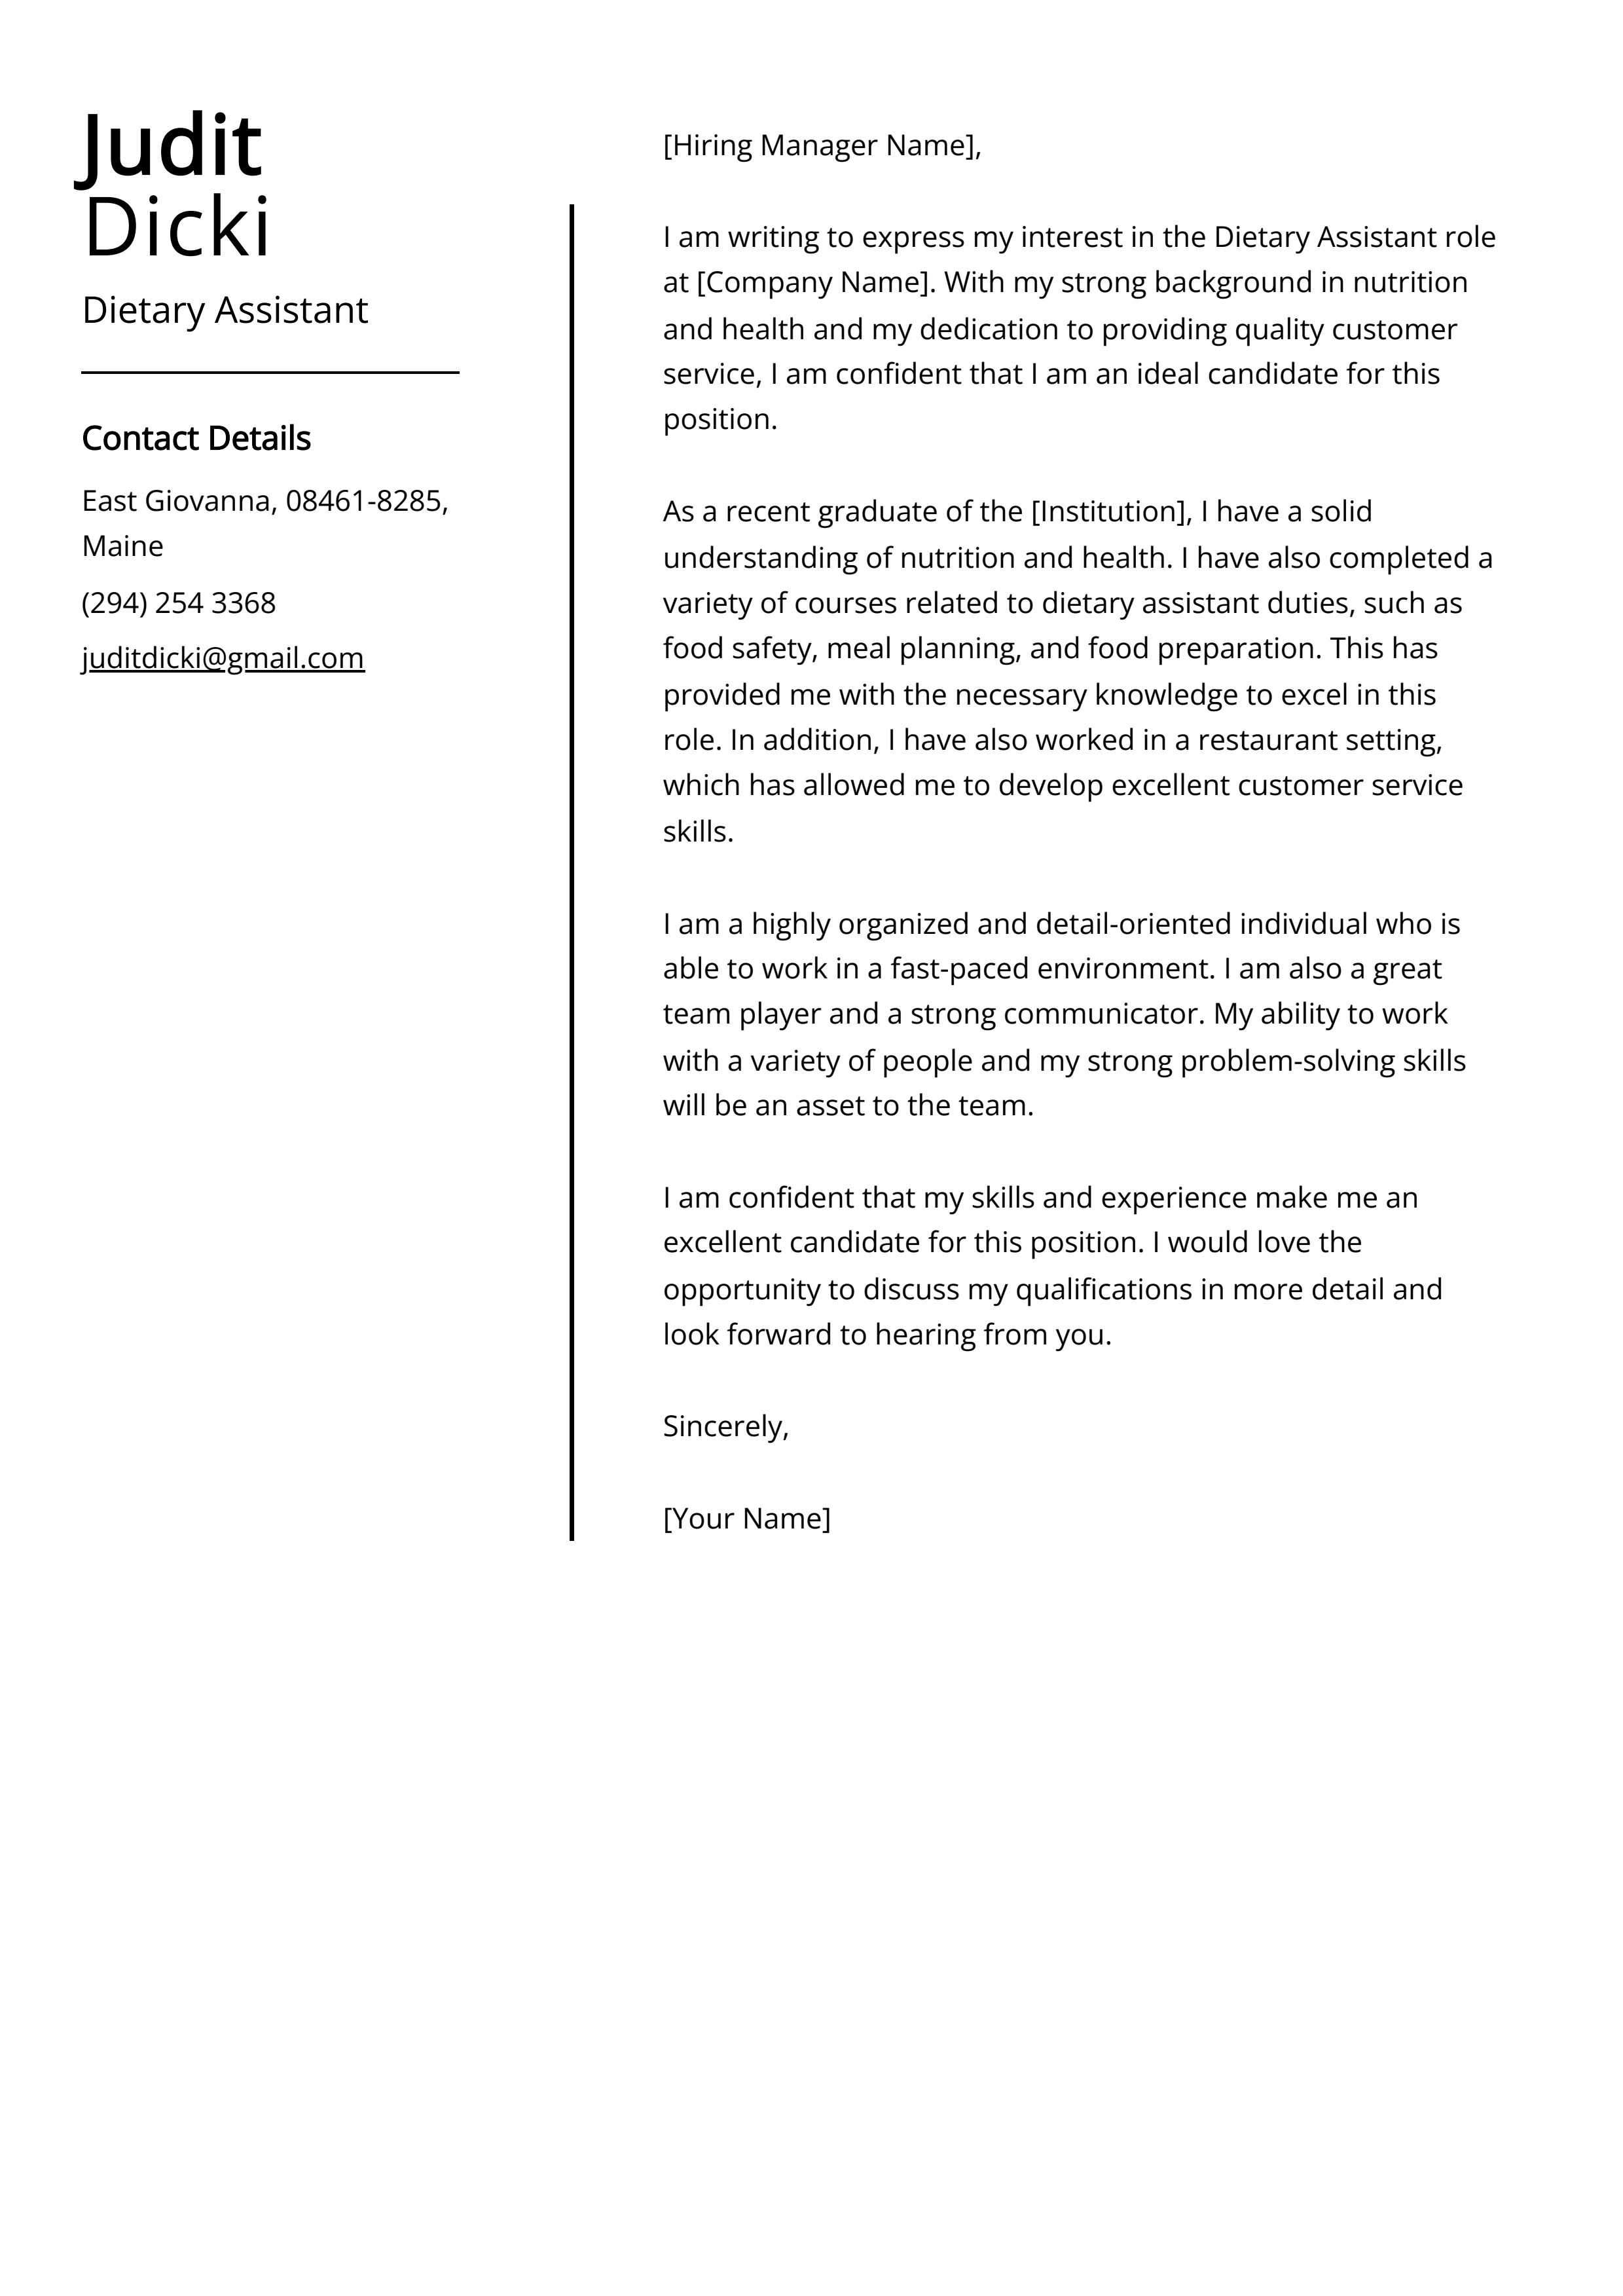 Dietary Assistant Cover Letter Example